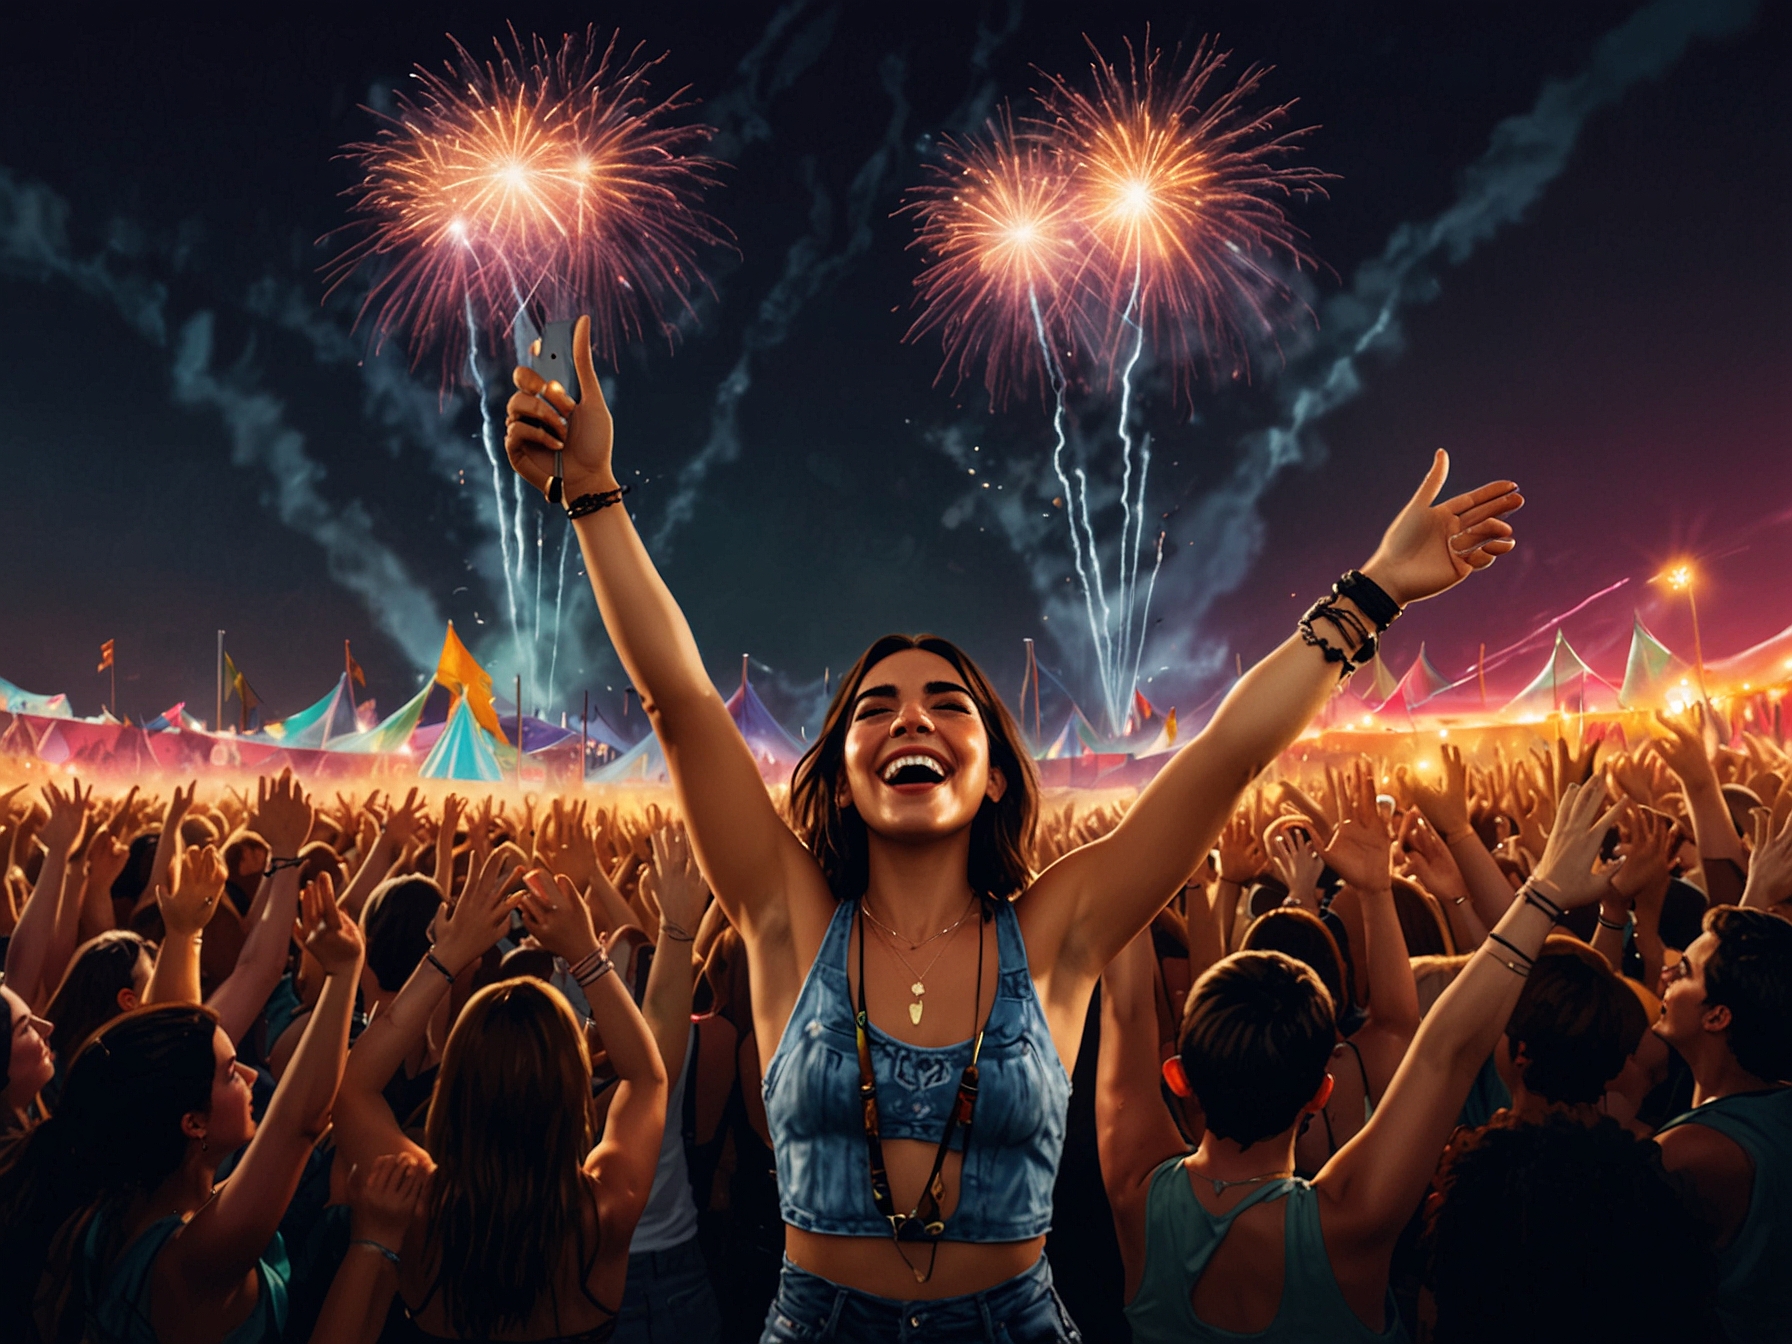 An enthusiastic crowd at Glastonbury Festival 2024, with fans waving their hands in the air, illuminated by vibrant stage lights. Dua Lipa prepares to deliver her anticipated headline performance.